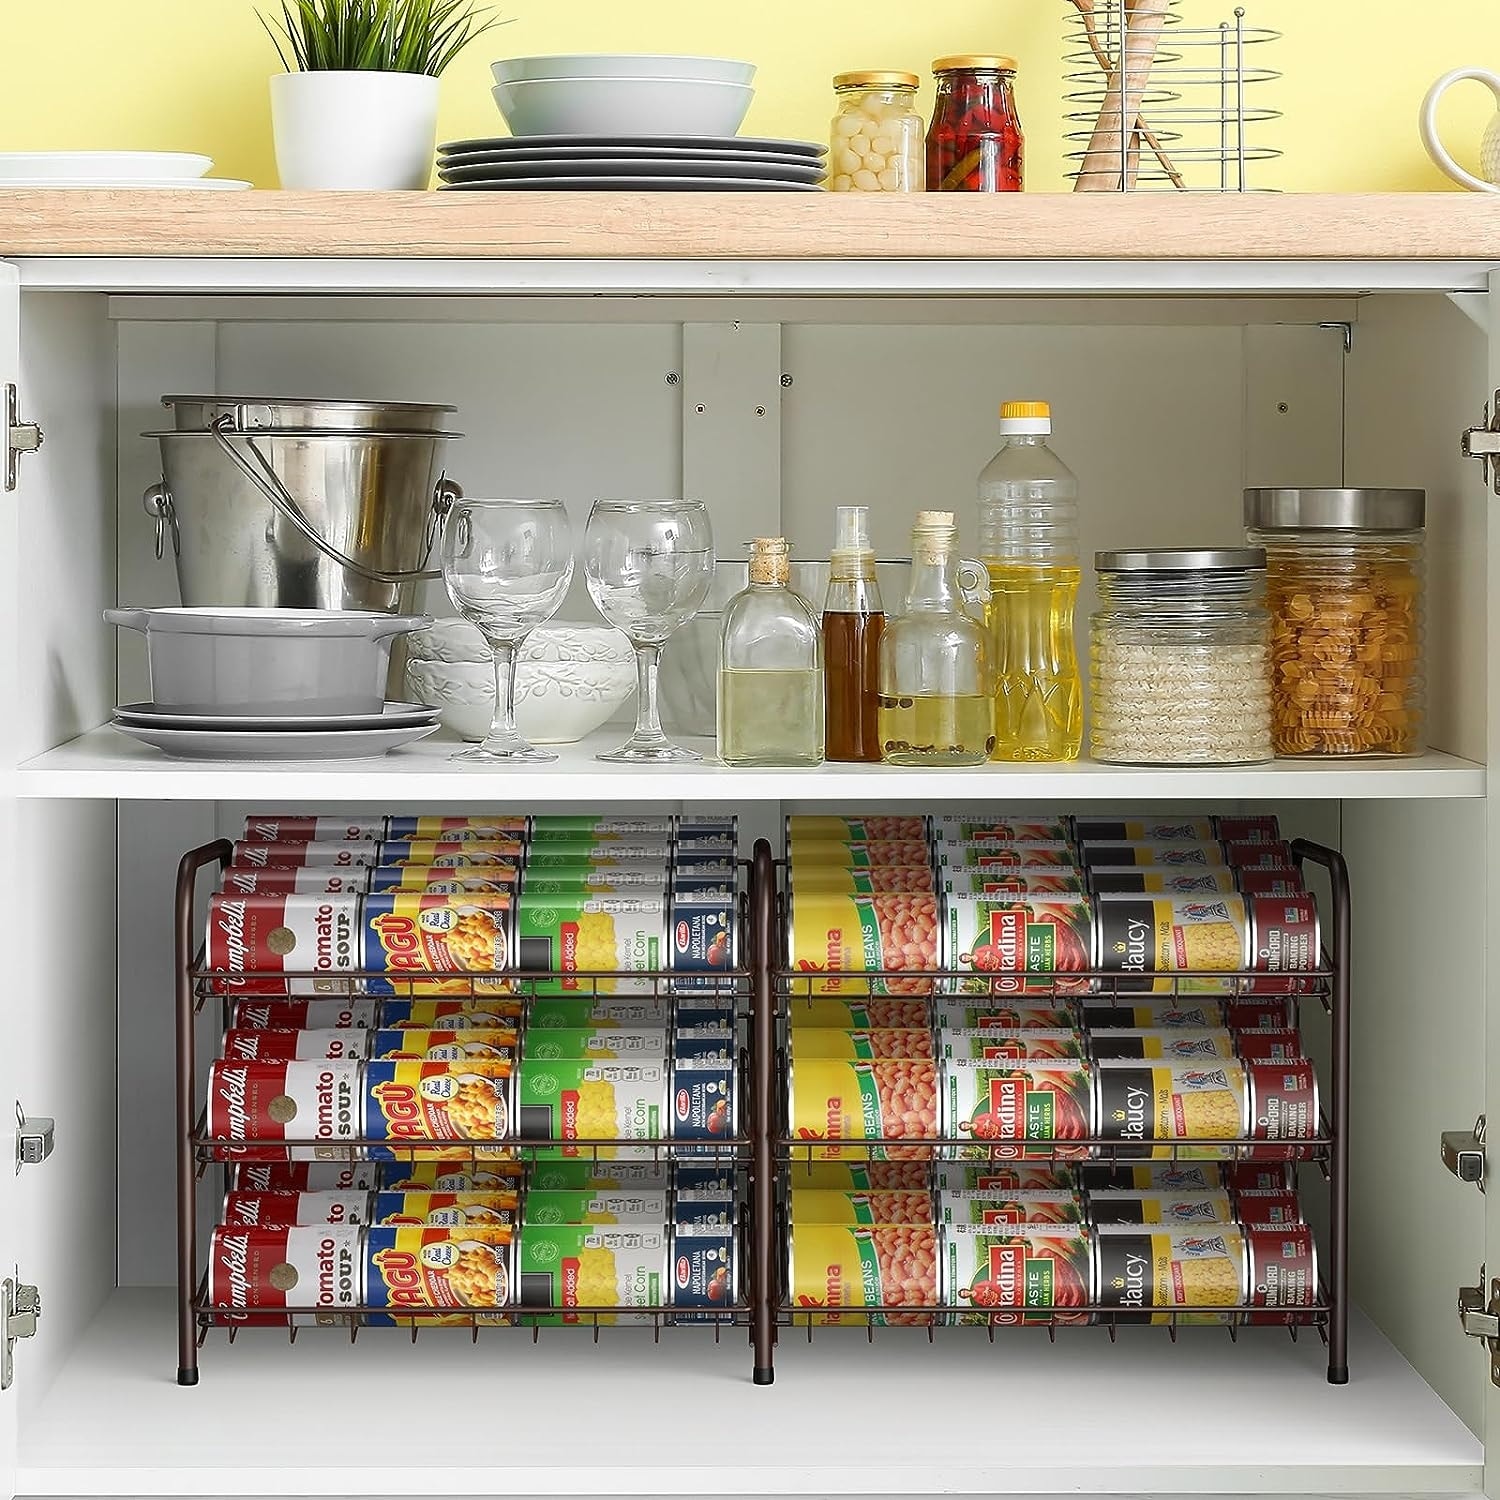 https://ak1.ostkcdn.com/images/products/is/images/direct/041bff74b9c4a718d39d44aa27b6eb7625d48a7e/2-in-1-3-Tier-Can-Storage-Rack-Holder-Holds-Up-72-Cans.jpg